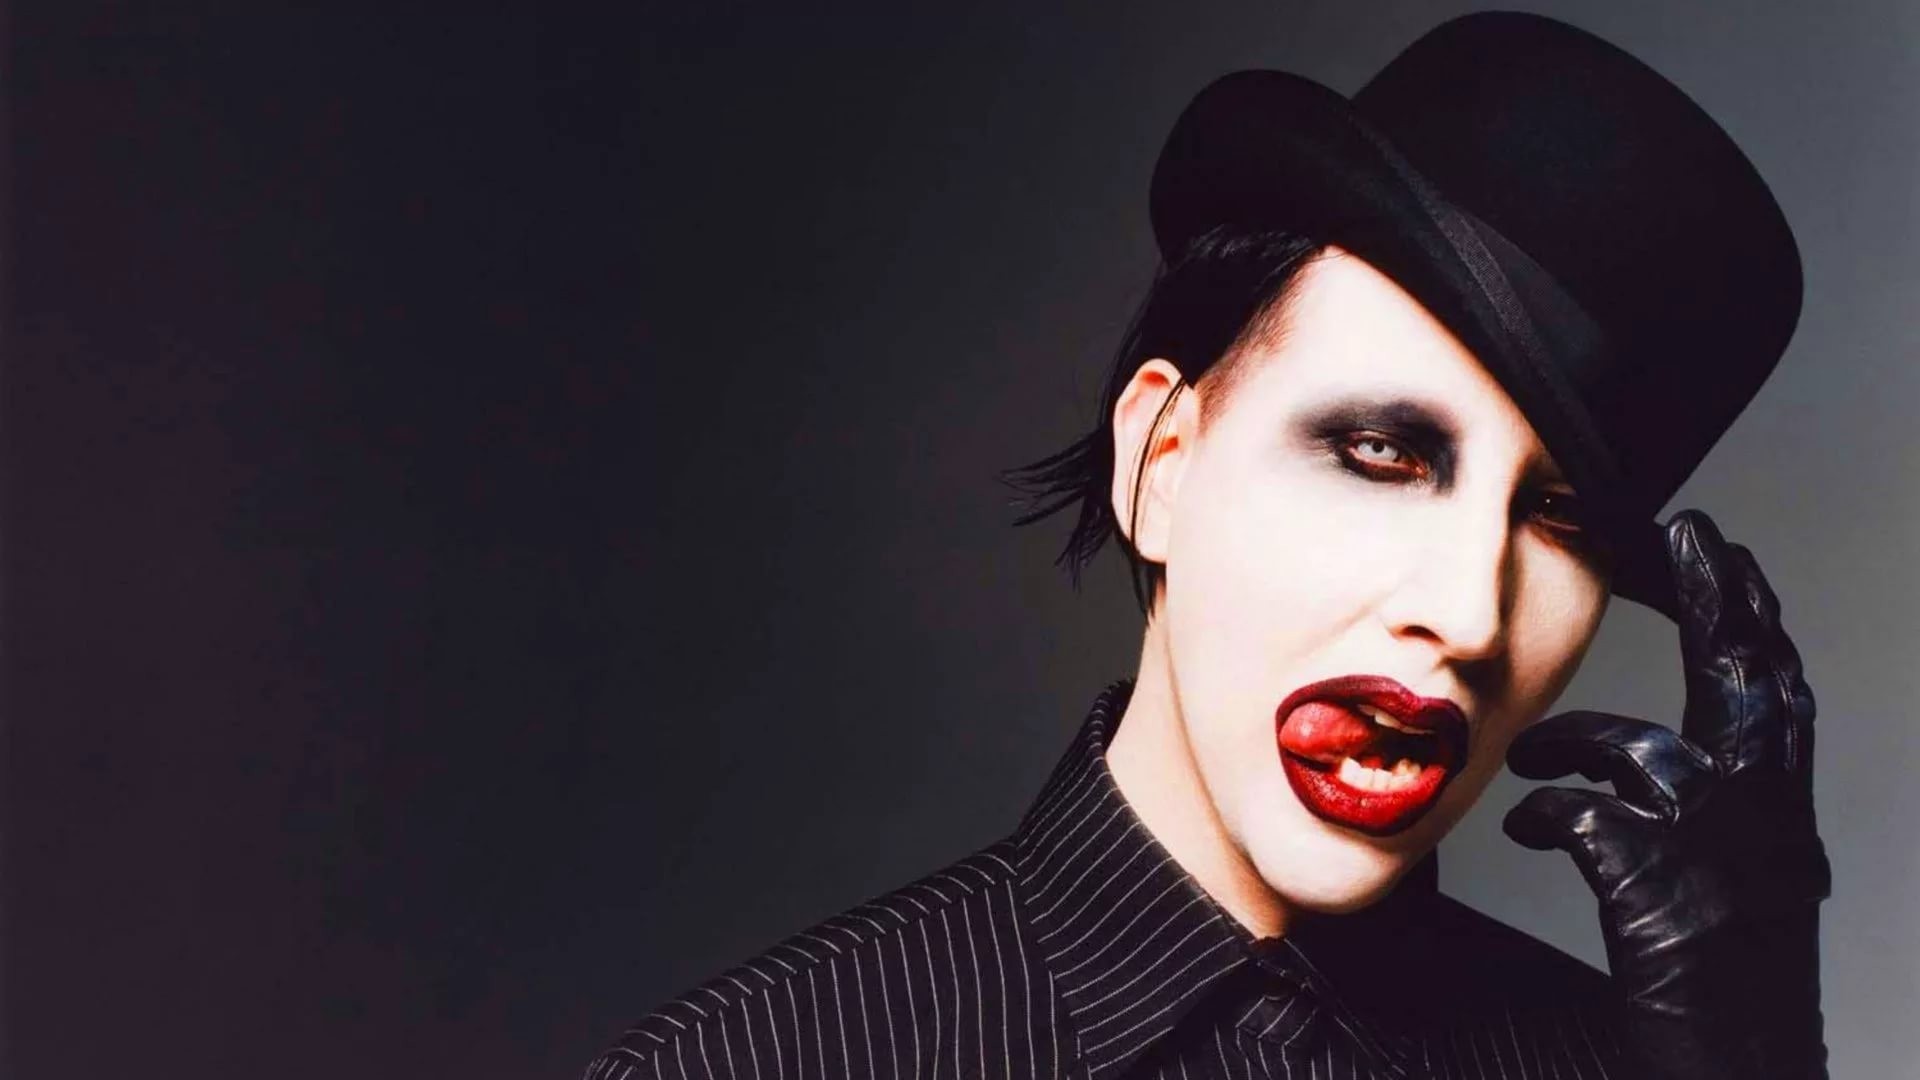 Marilyn Manson is coming to Hong Kong next year for the first time.